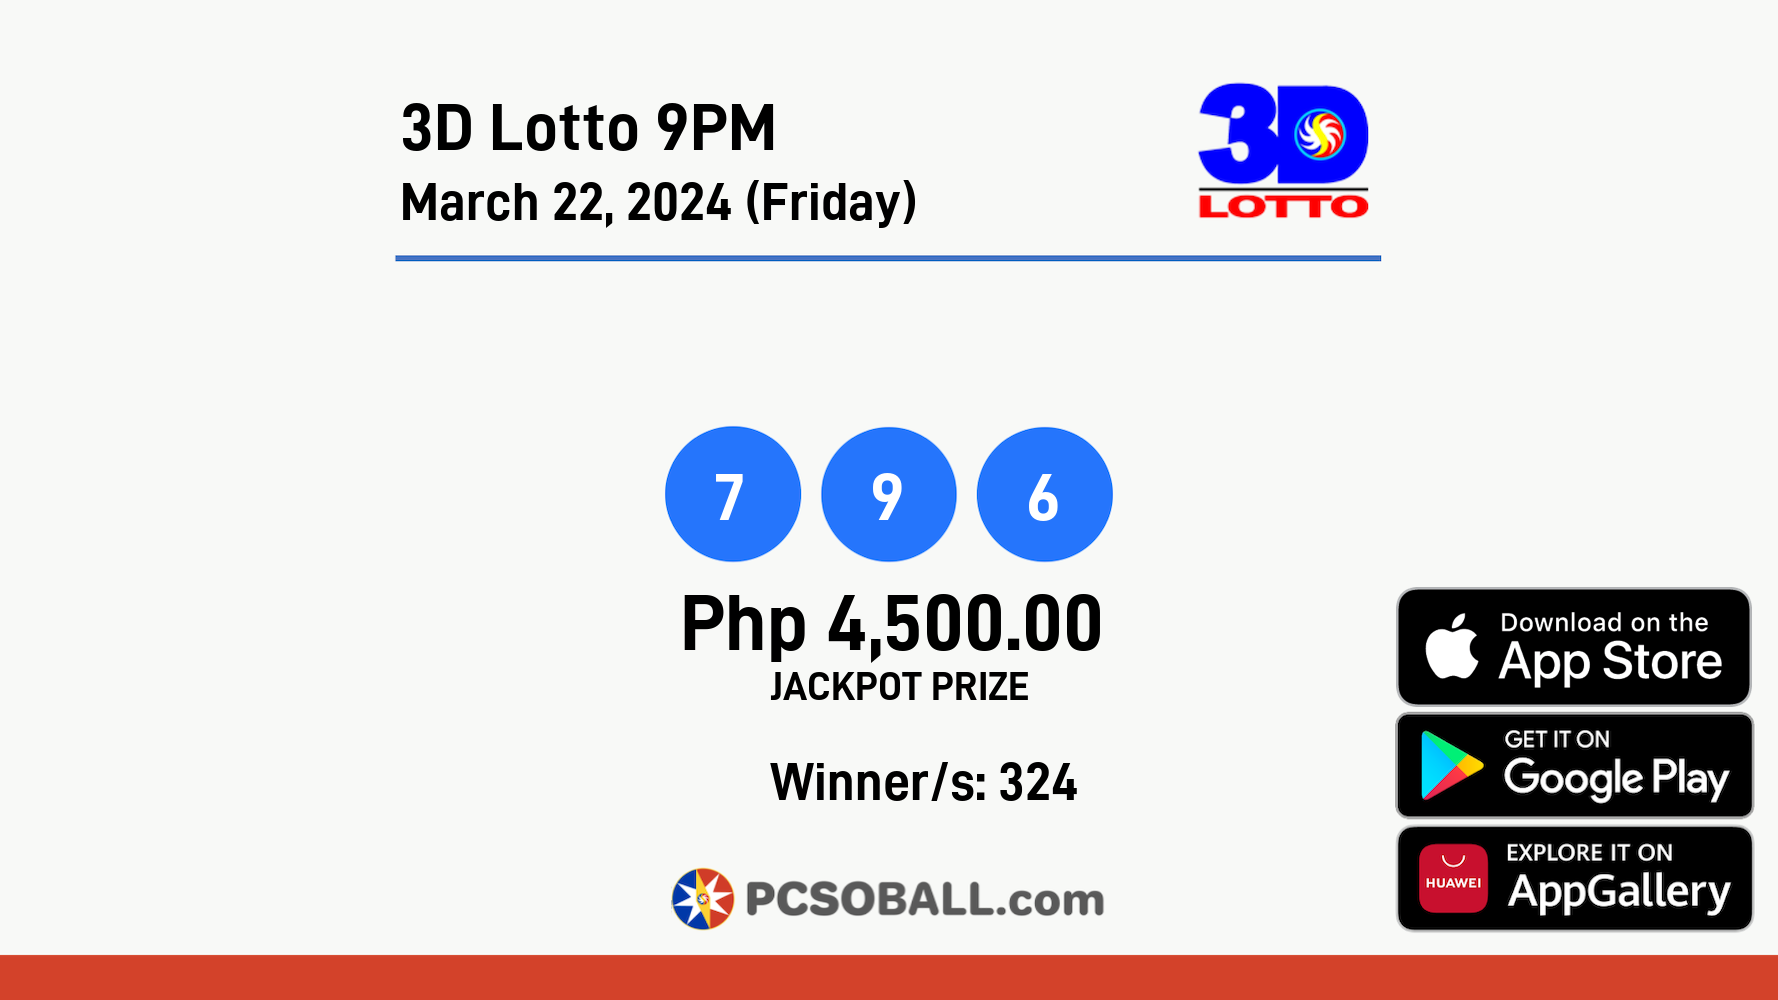 3D Lotto 9PM March 22, 2024 (Friday) Result